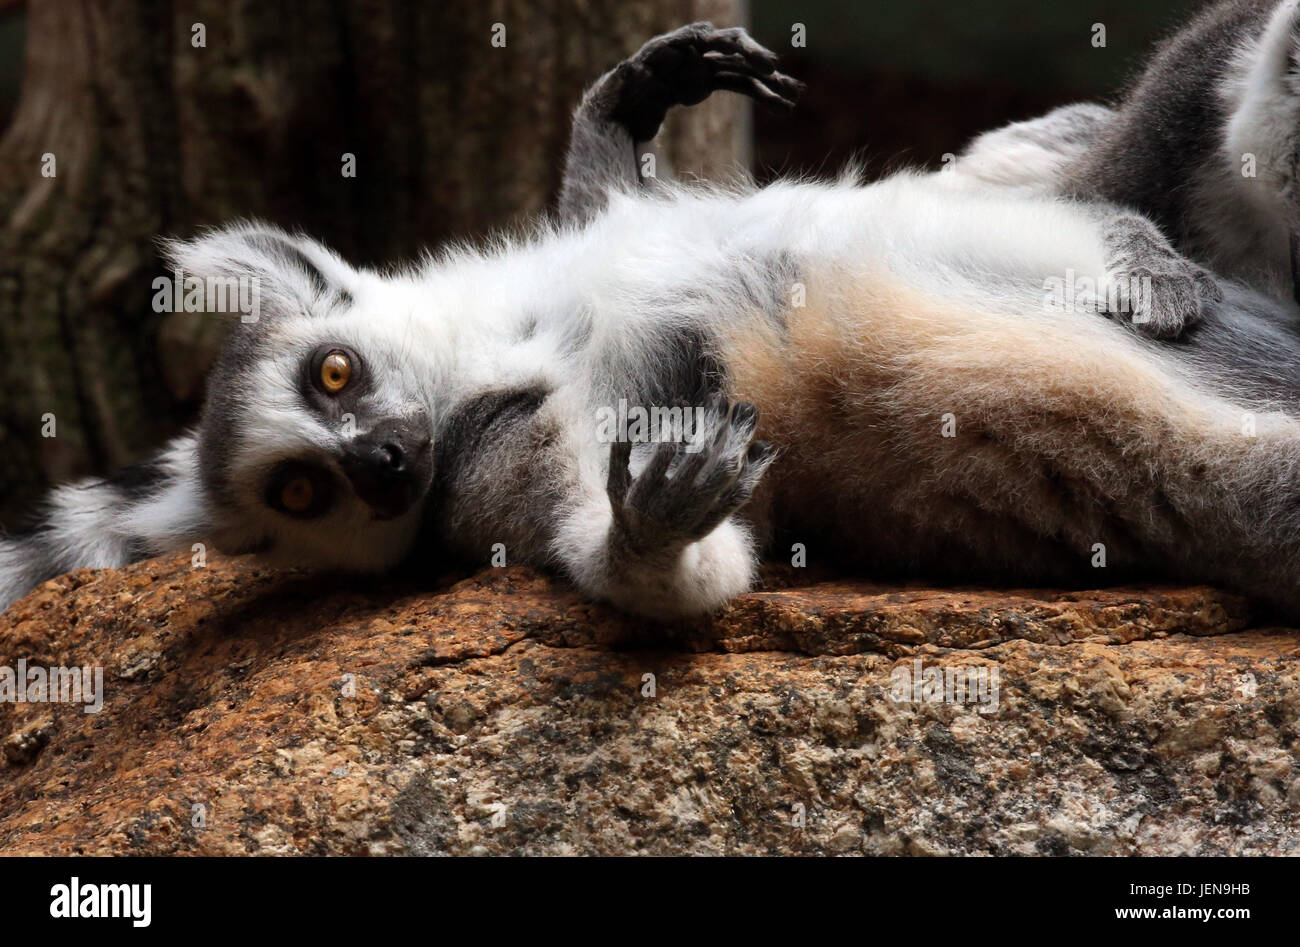 Munich, Germany. 20rd June, 20. A Lemur stretches on a rock in ...